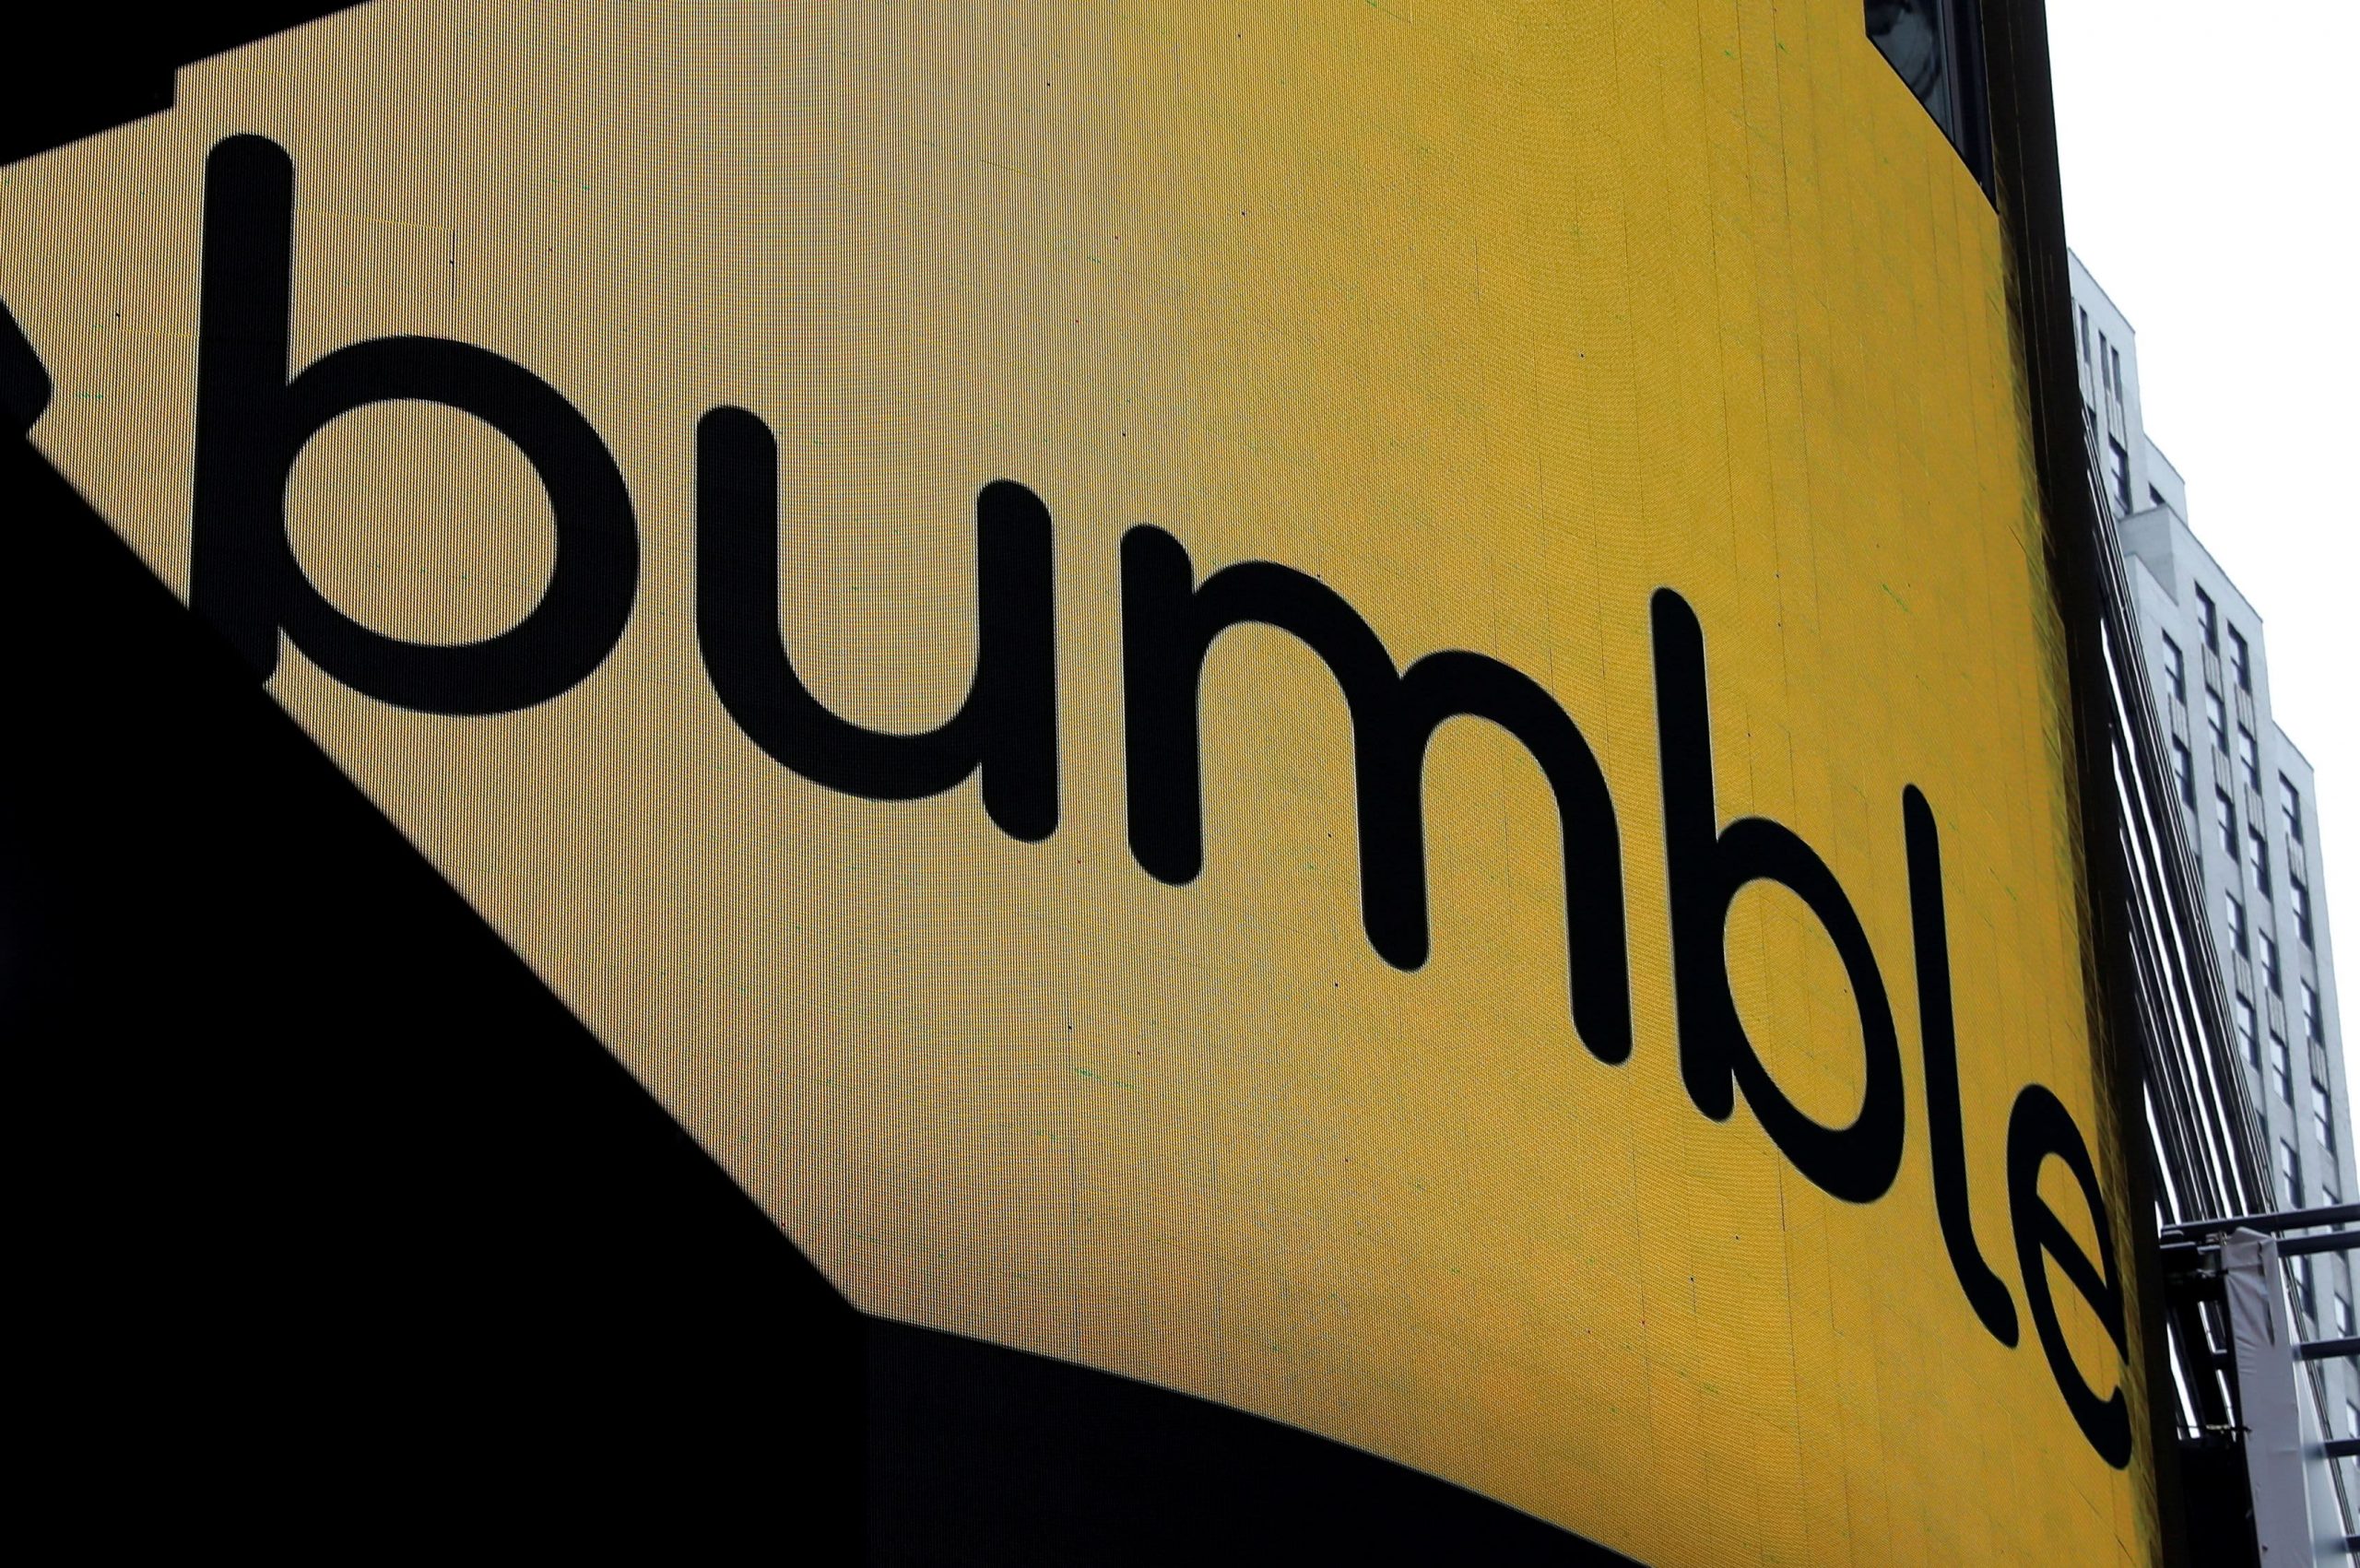 Bumble shares fall sharply after first-quarter report, dipping below IPO price